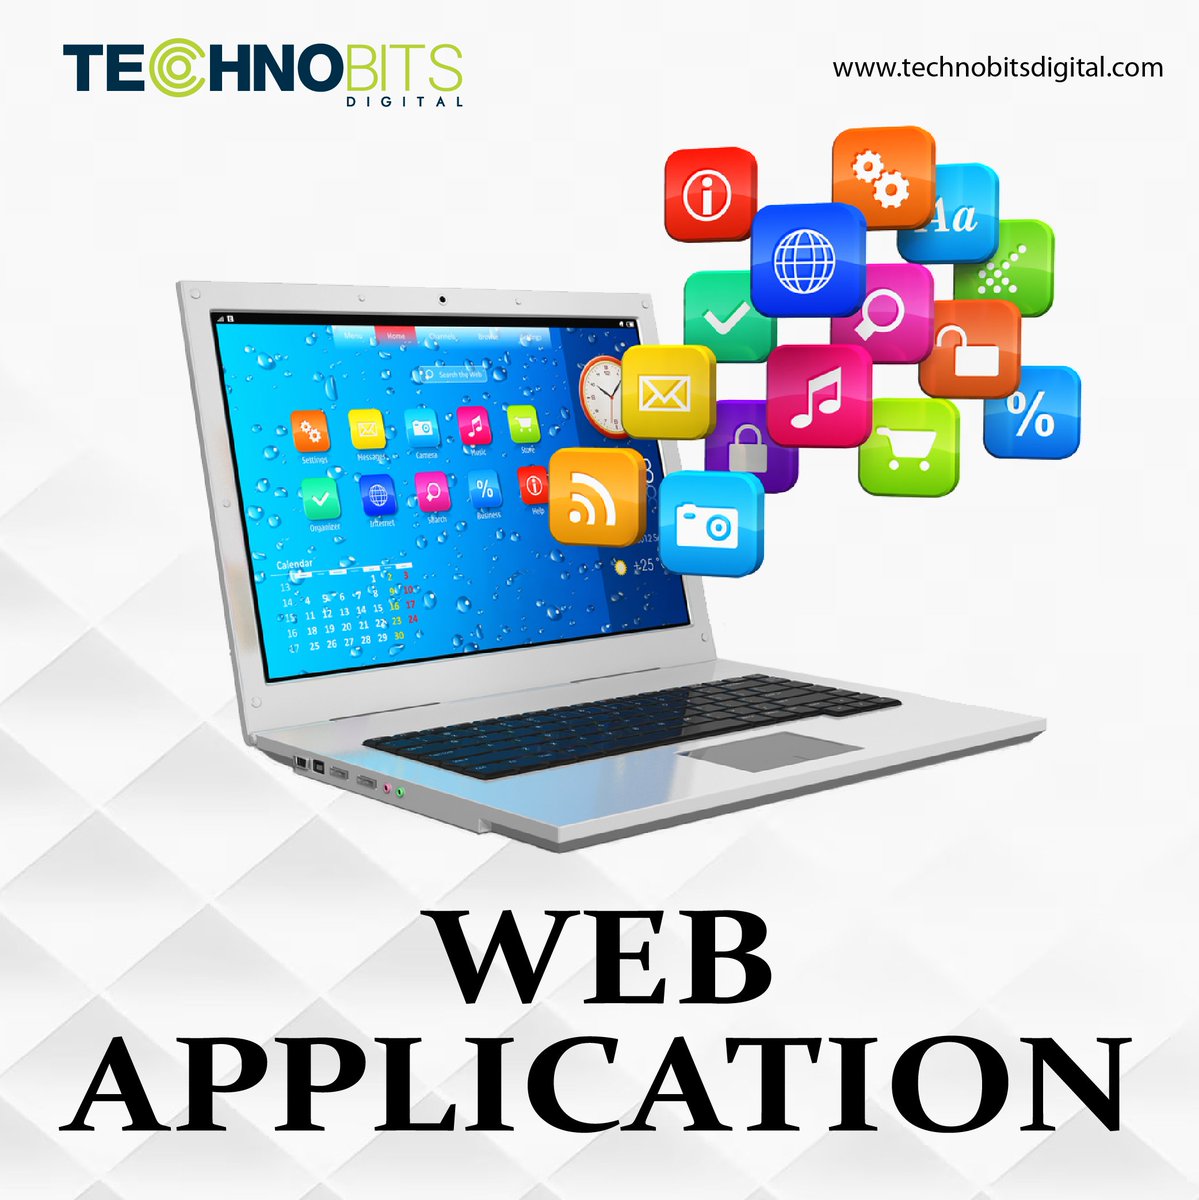 Our website application provides a sleek, modern interface to elevate your online experience. With customizable settings and intuitive tools, navigating features is effortless - Technobits Digital.
.
.
#TechnobitsDigital #evolgroup⭐️ #webapp #websiteapplication 🖥⚡🧑‍